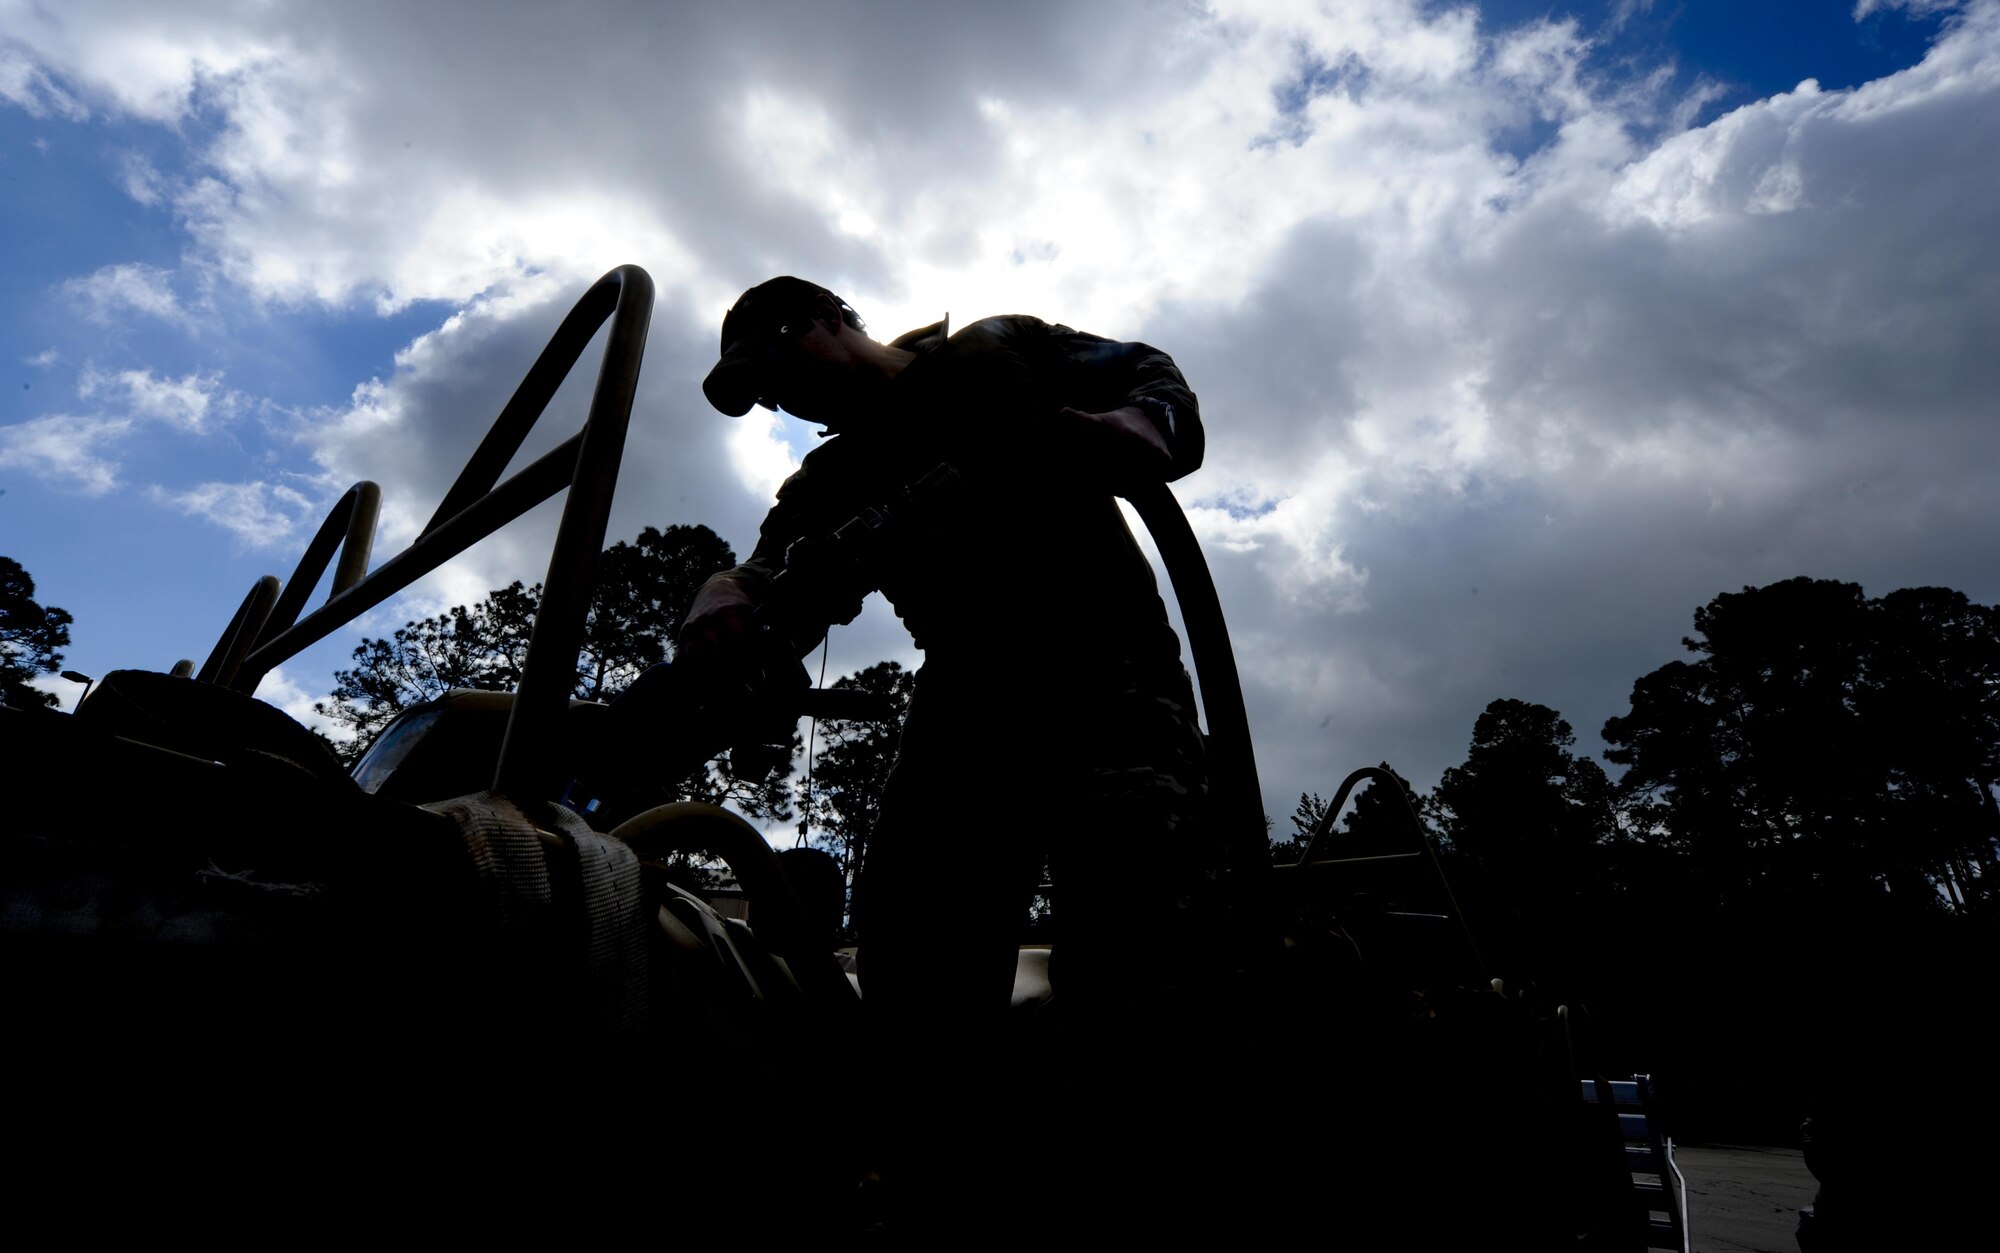 A Solider with 1st Battalion, 10th Special Forces Group, refuels the gas tank of an all-terrain vehicle at Buck Pond in Navarre, Fla., March 14, 2017. An instructor from the 1st Special Operations Support Squadron Operational Support Joint Office taught Soldiers riding techniques to qualify them for ATV usage in special operations missions. (U.S. Air Force photo by Airman 1st Class Dennis Spain)